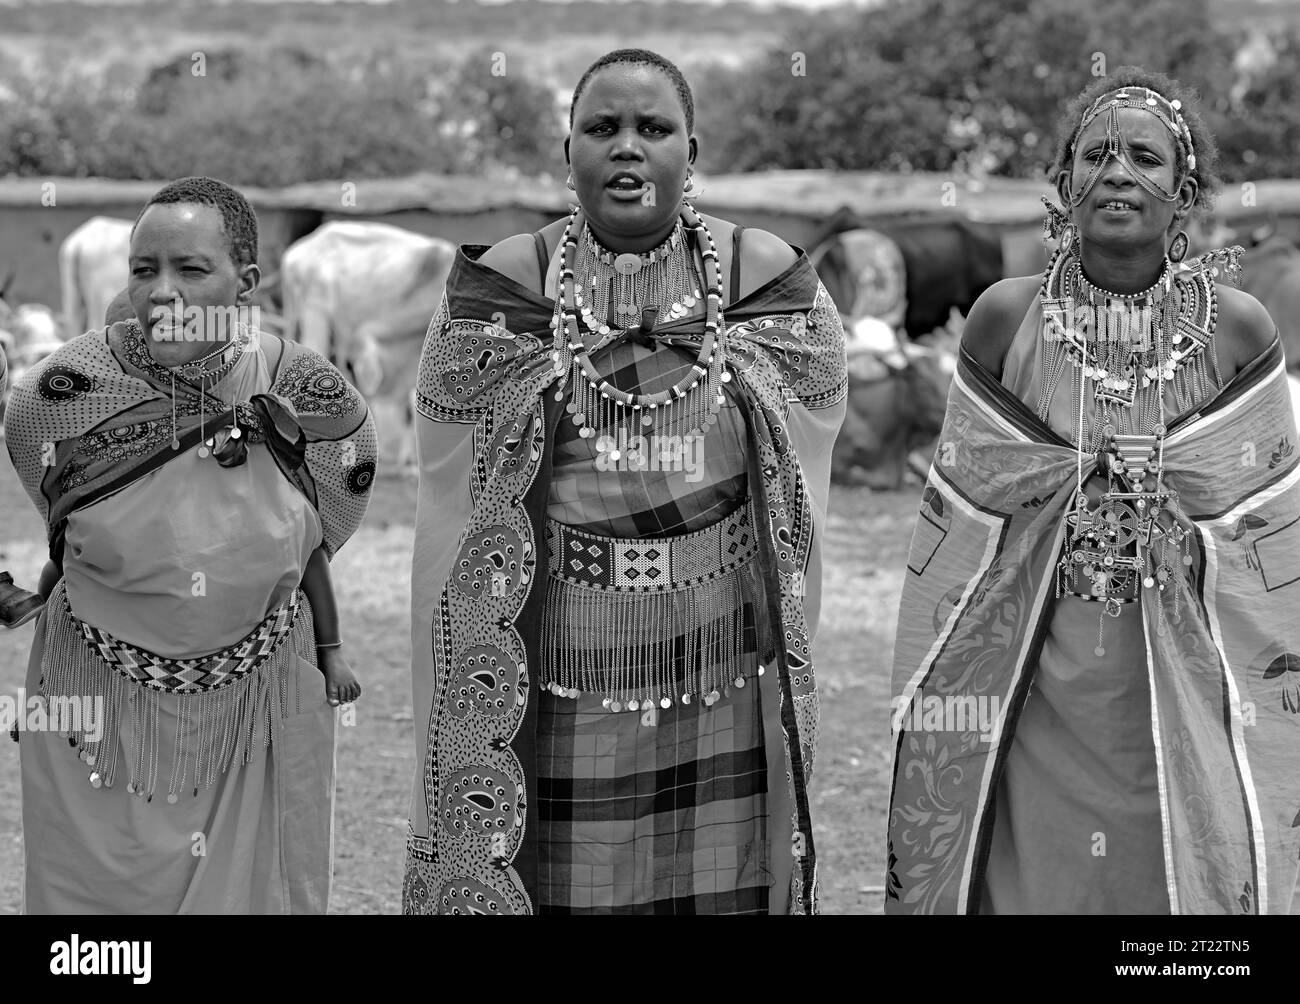 Tribal people of Maasai Mara entertaining the visitors with their traditional customs in their village Stock Photo